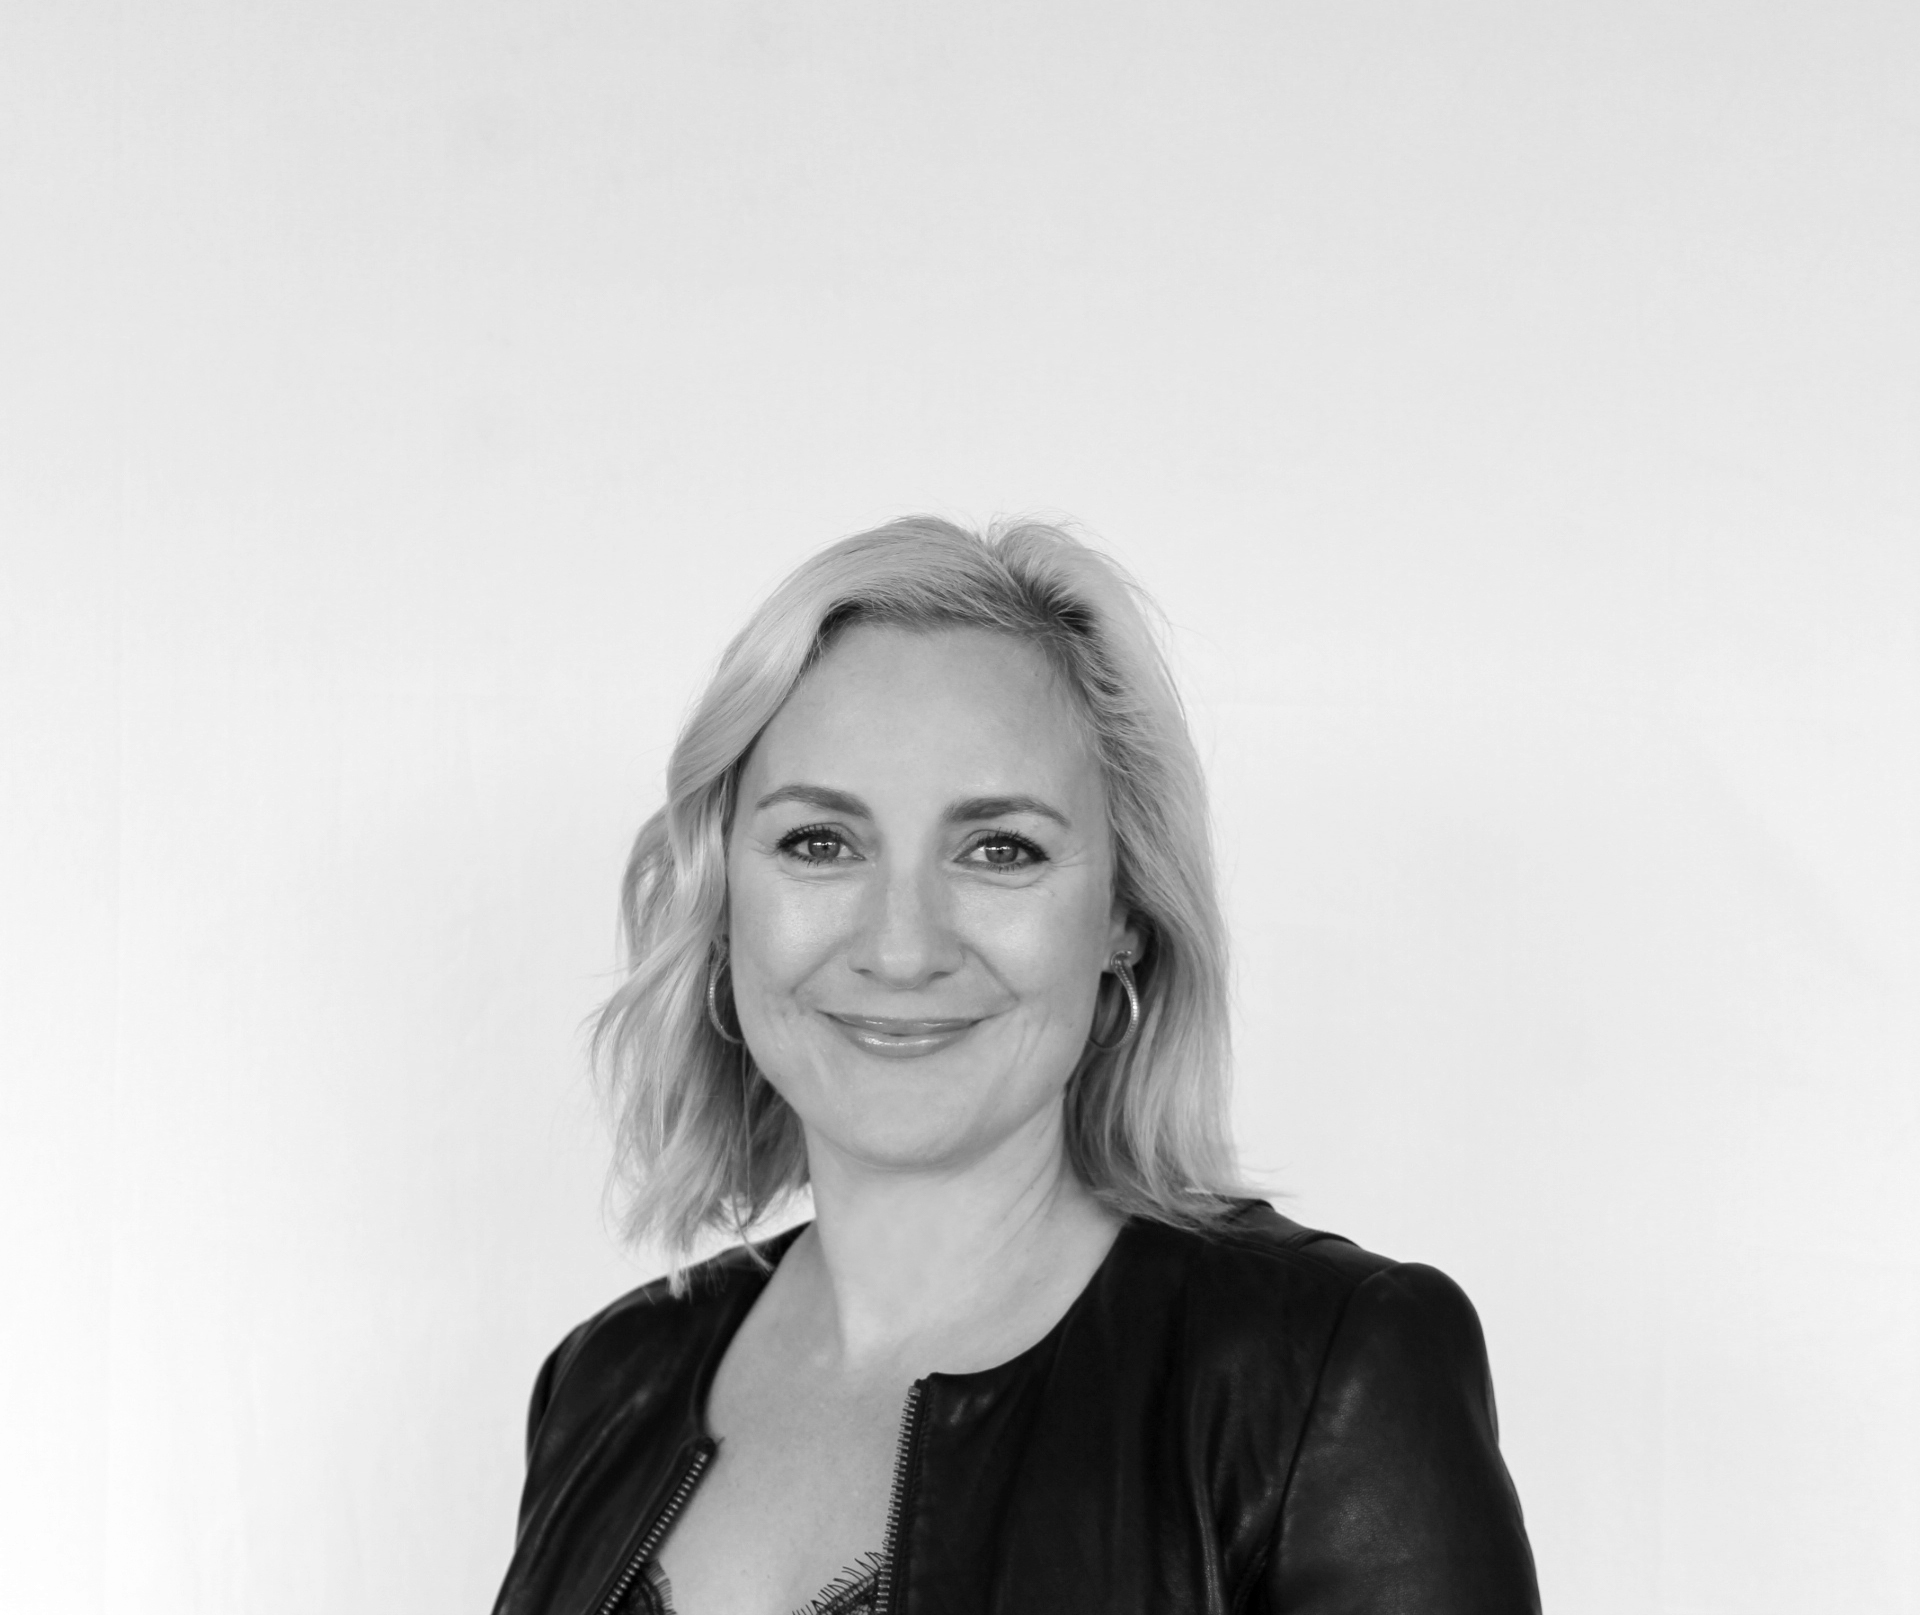 In conversation with Natasha Bourke, CEO at Two Hundred Doors and Founder of Skintopia